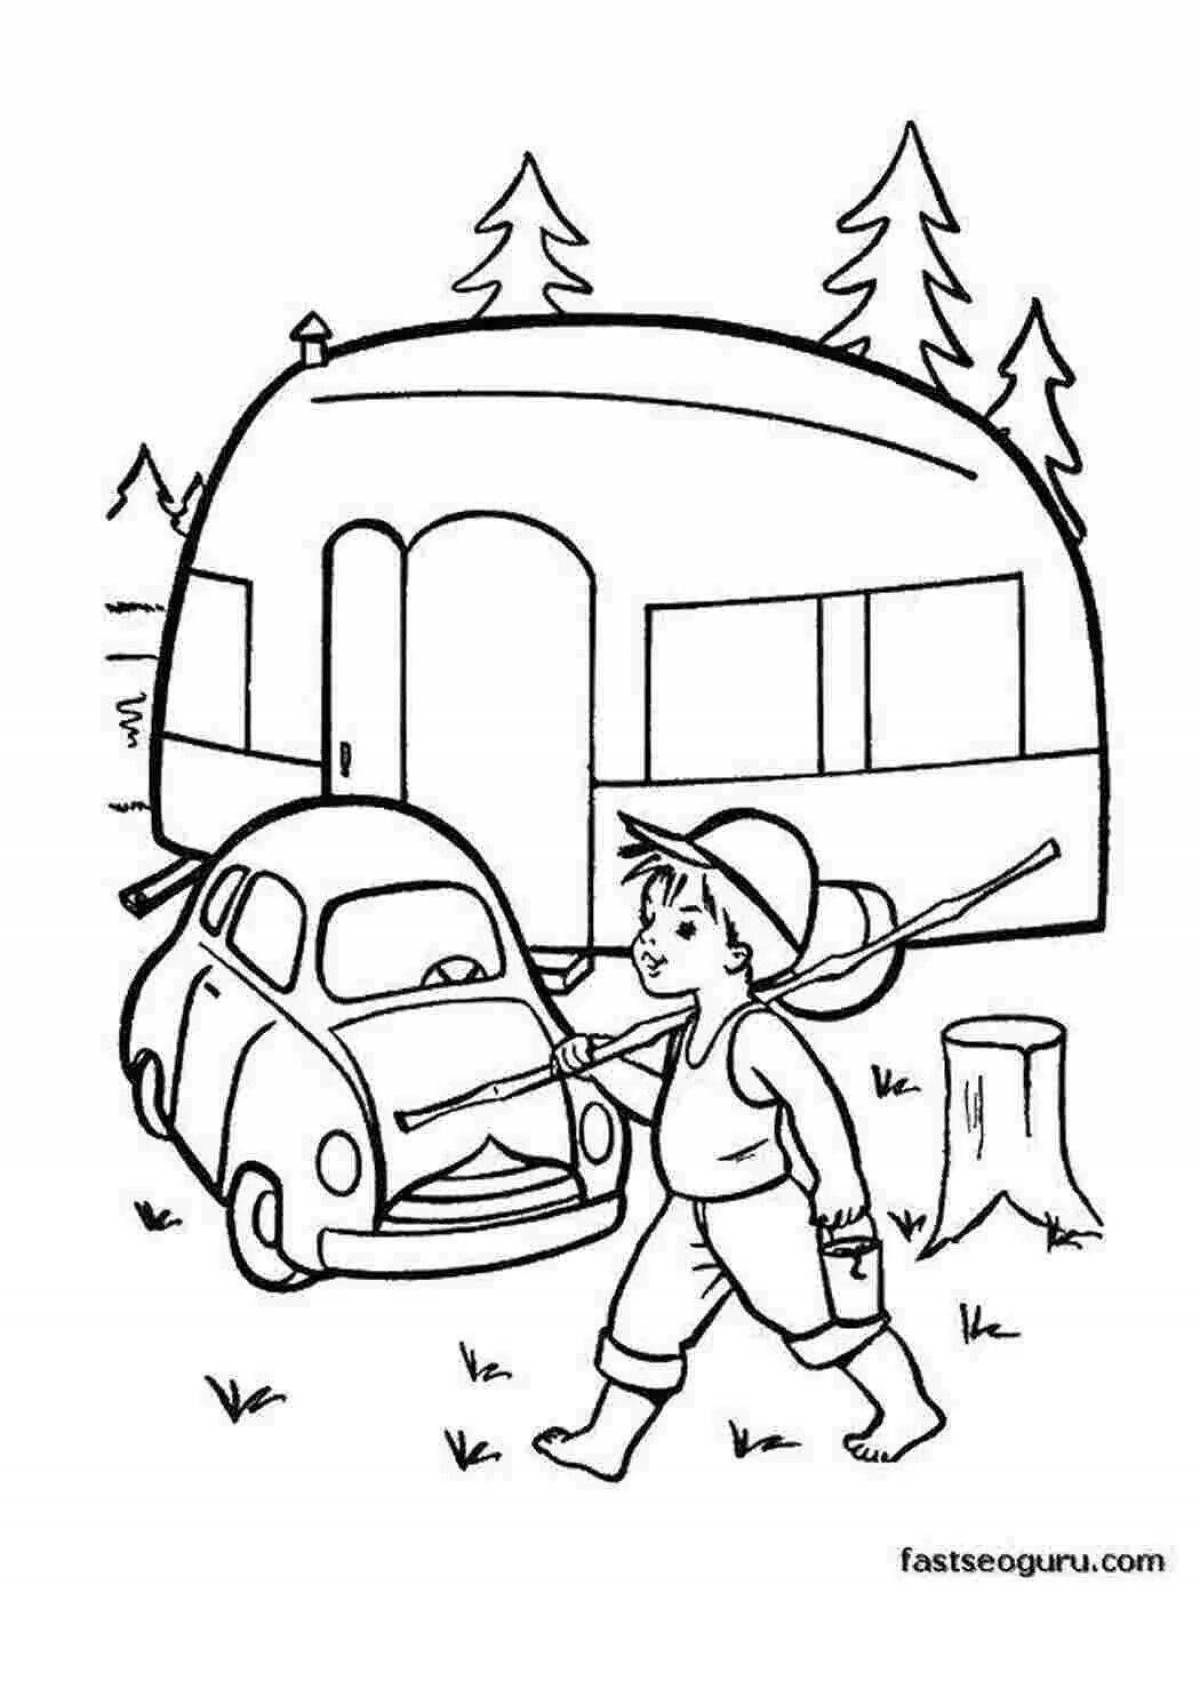 Live travel coloring book